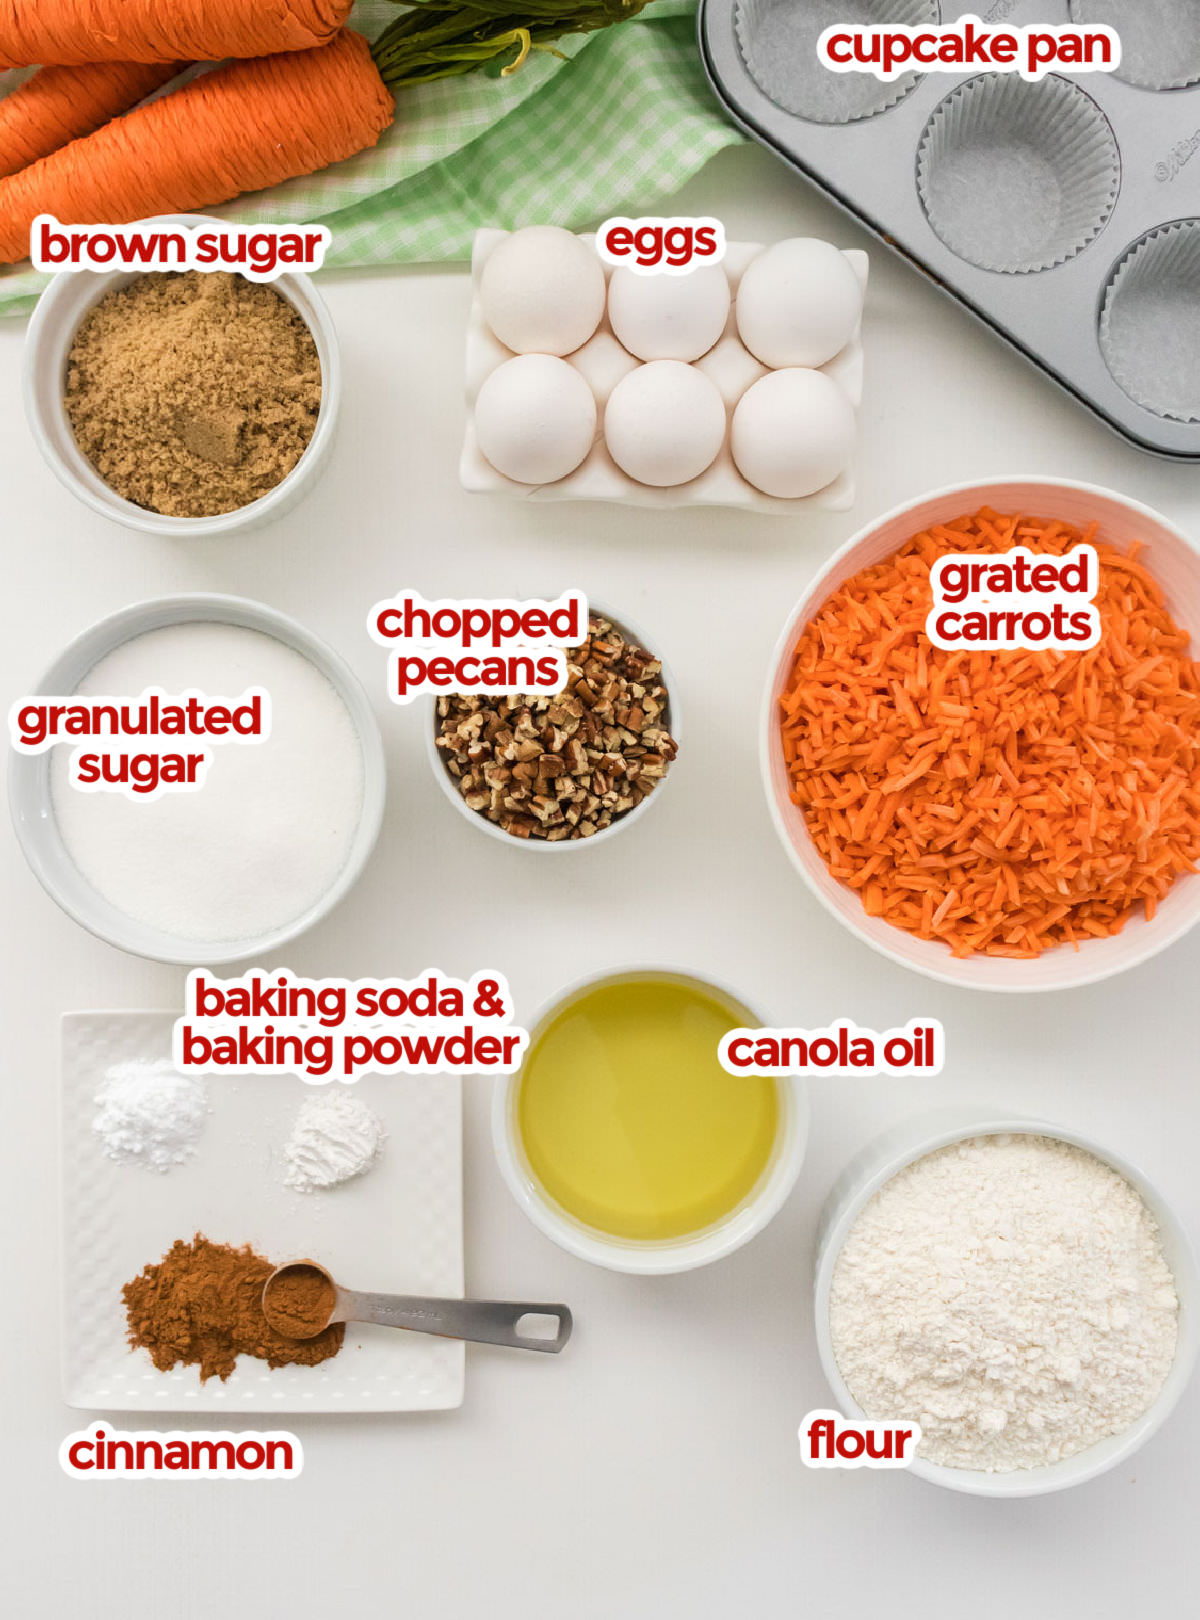 All the ingredients you will need to make Carrot Cake Cupcakes including flour, sugar, brown sugar, carrots, eggs, canola oil, chopped pecans and spices.